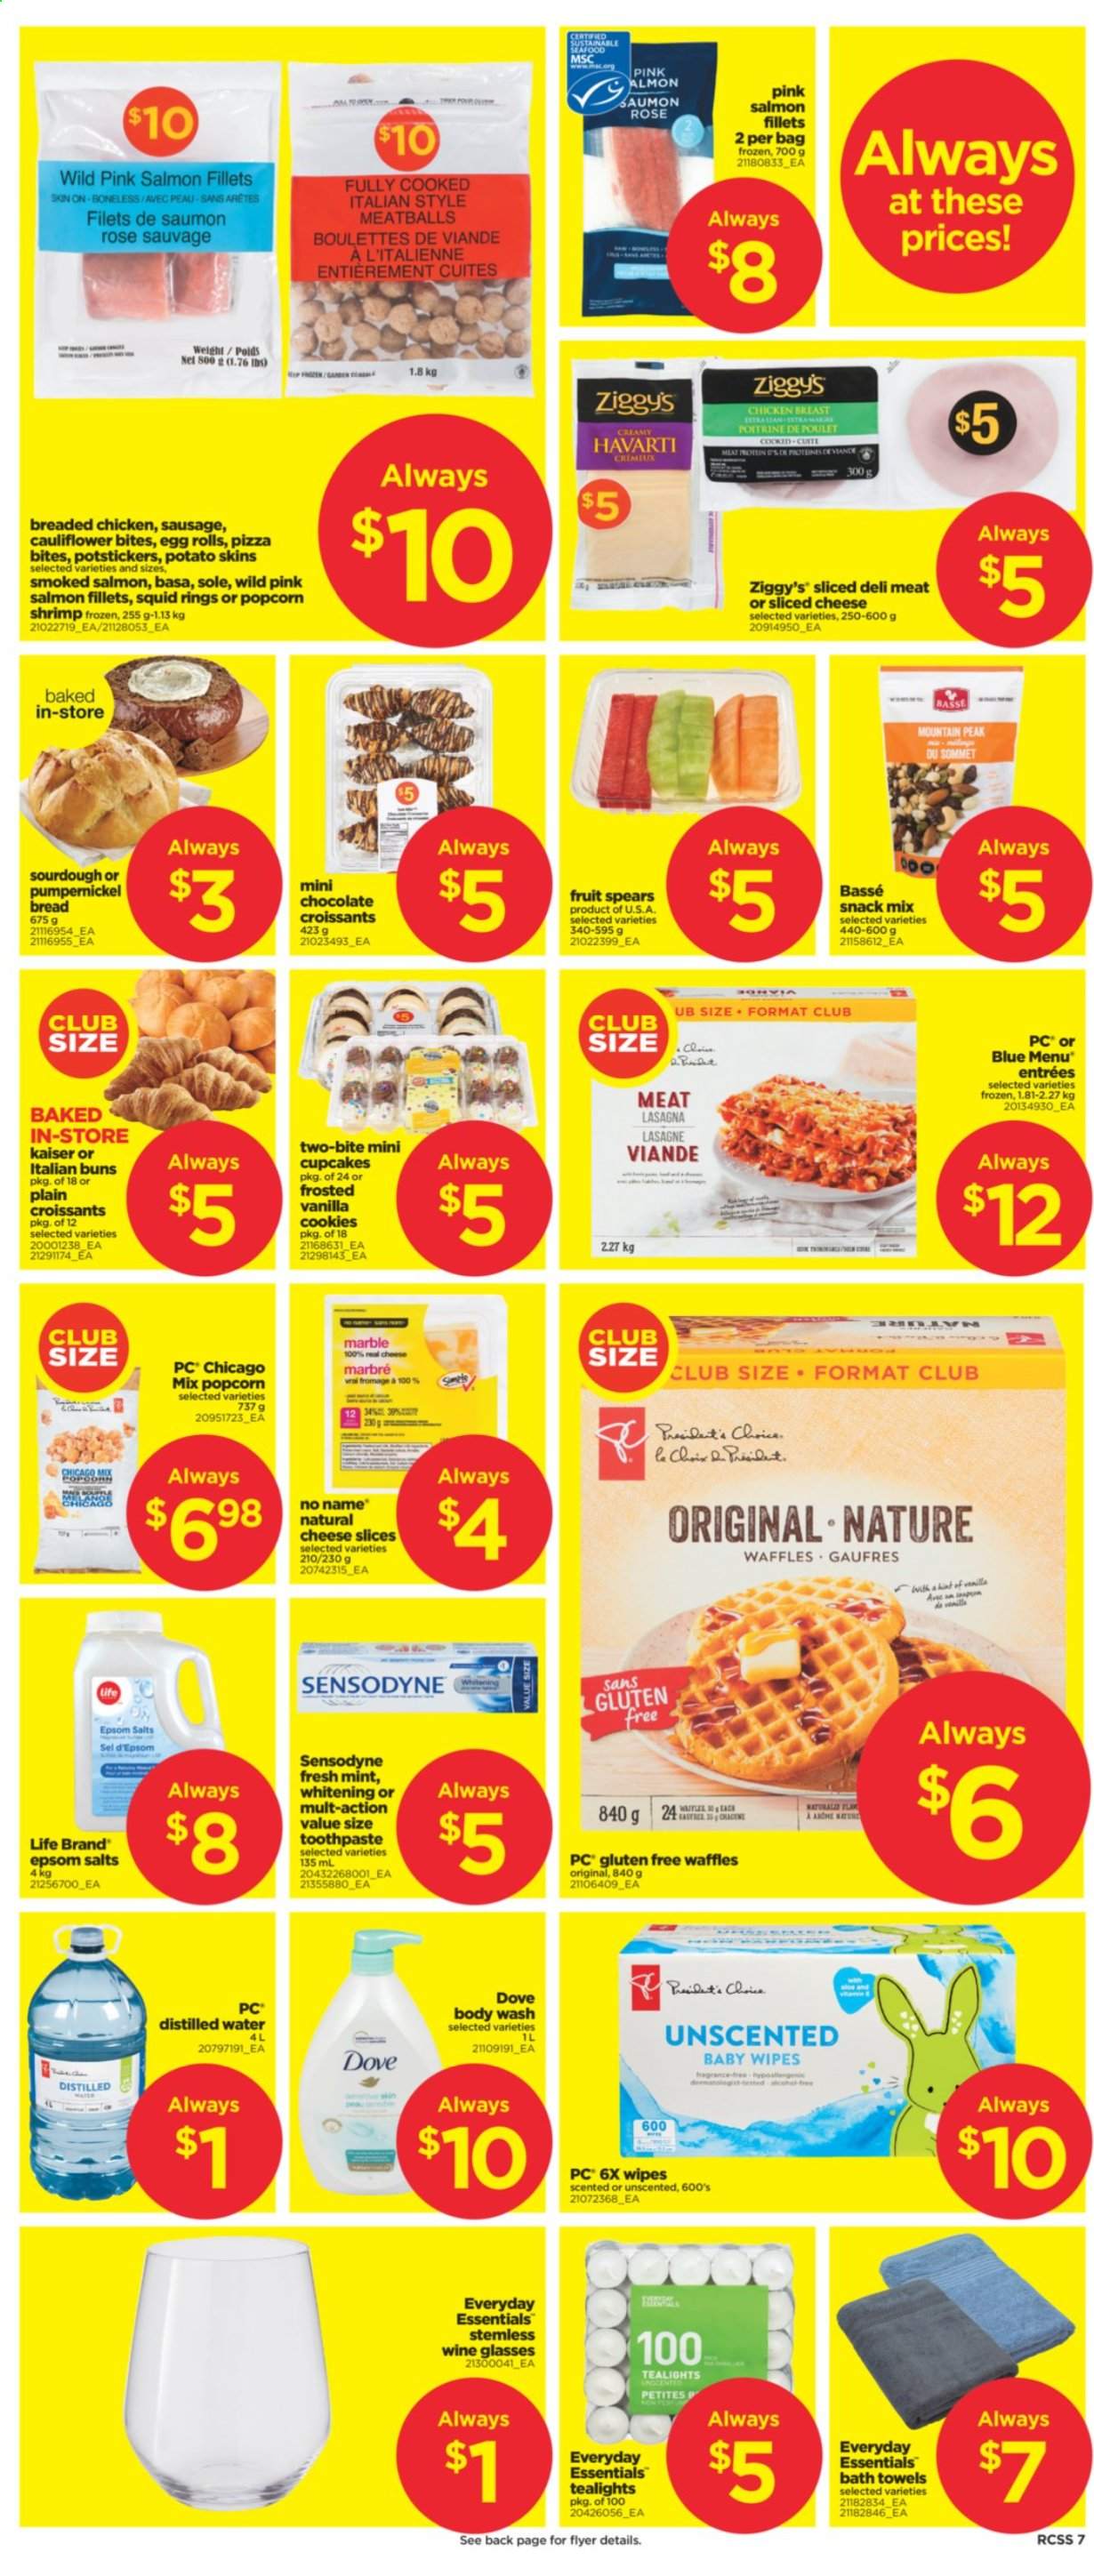 thumbnail - Real Canadian Superstore Flyer - August 19, 2021 - August 25, 2021 - Sales products - bread, croissant, buns, cupcake, waffles, salmon, salmon fillet, smoked salmon, squid, seafood, shrimps, squid rings, No Name, pizza, meatballs, egg rolls, lasagna meal, sausage, sliced cheese, Havarti, Rama, cookies, chocolate, snack, wine, rosé wine, chicken, wipes, baby wipes, body wash, toothpaste, fragrance, bag, wine glass, bath towel, towel, Sensodyne. Page 7.